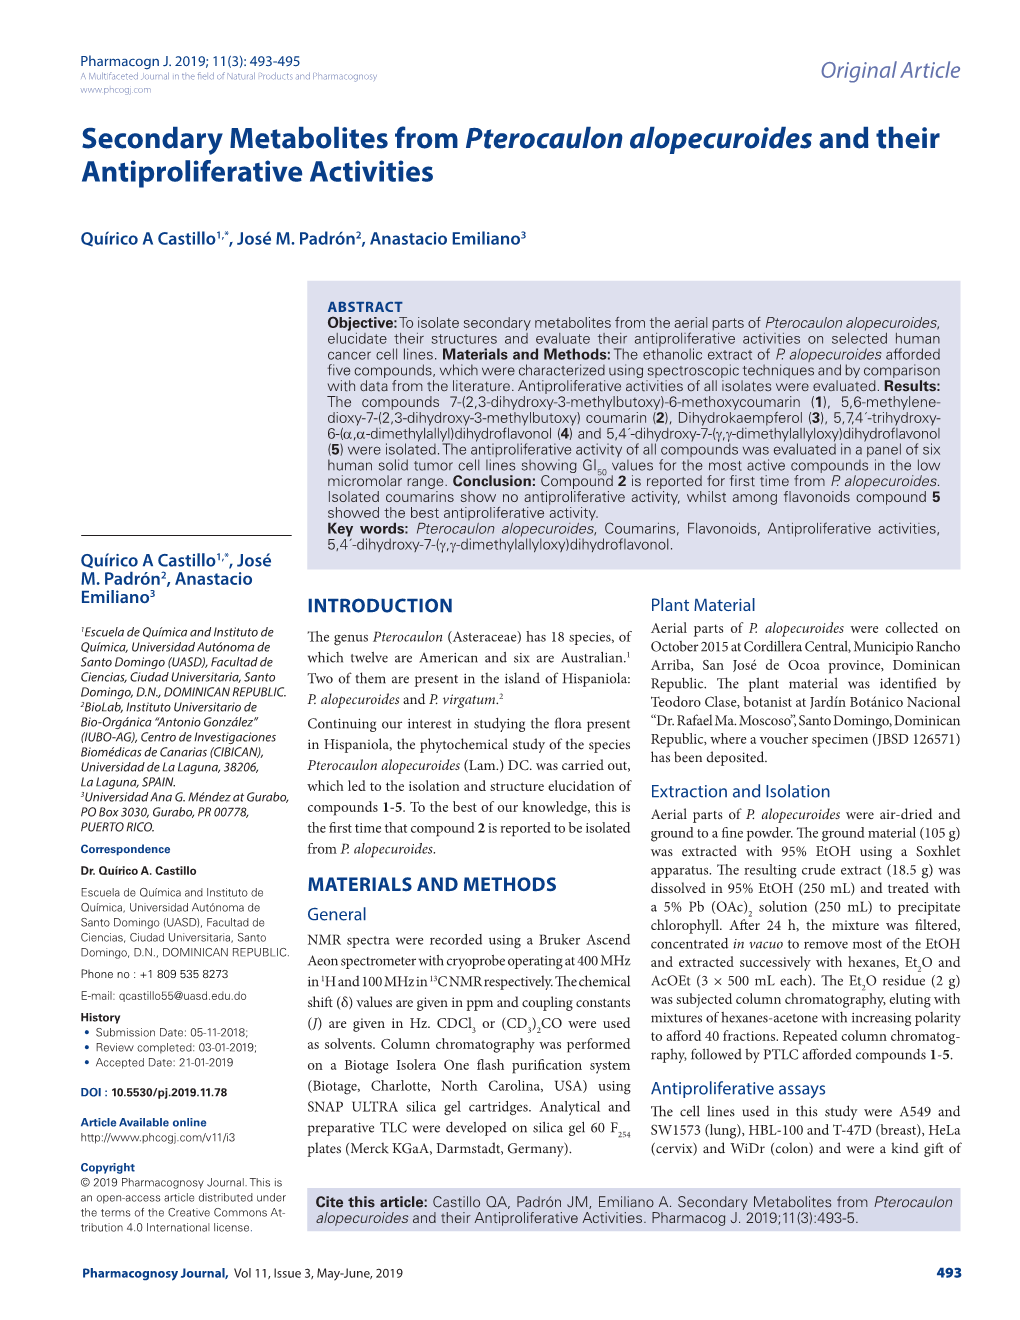 Secondary Metabolites from Pterocaulon Alopecuroides and Their Antiproliferative Activities